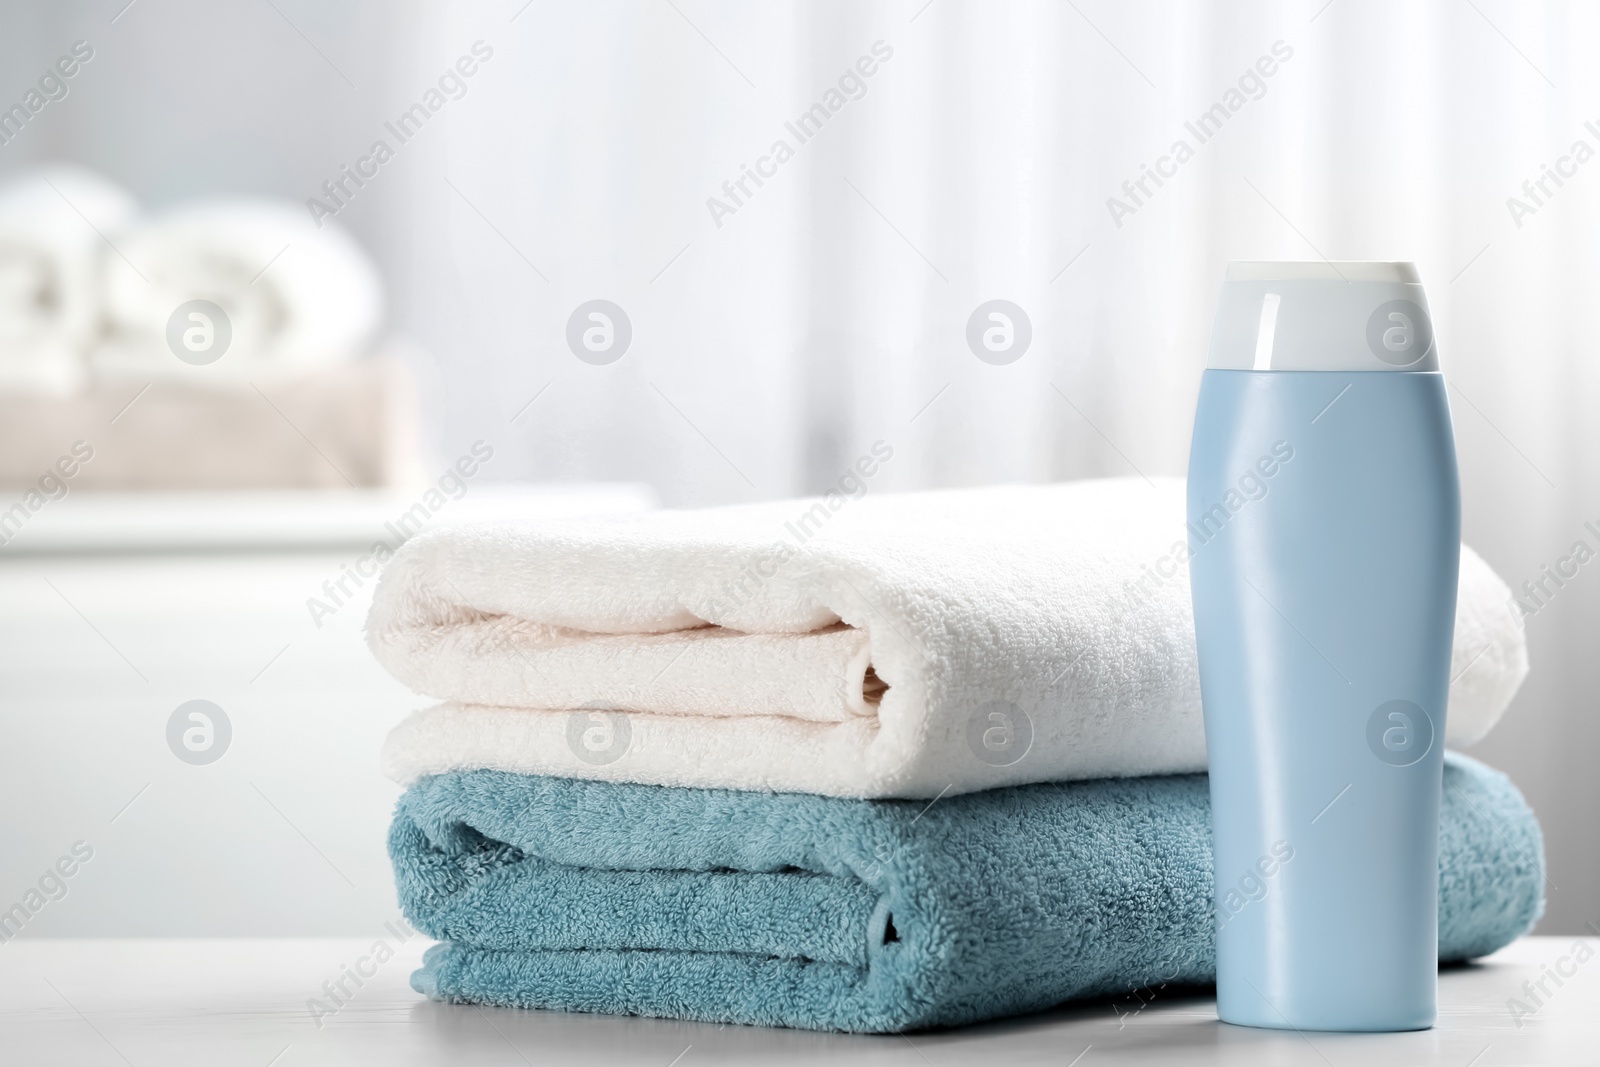 Photo of Clean towels and shampoo bottle on table. Space for text